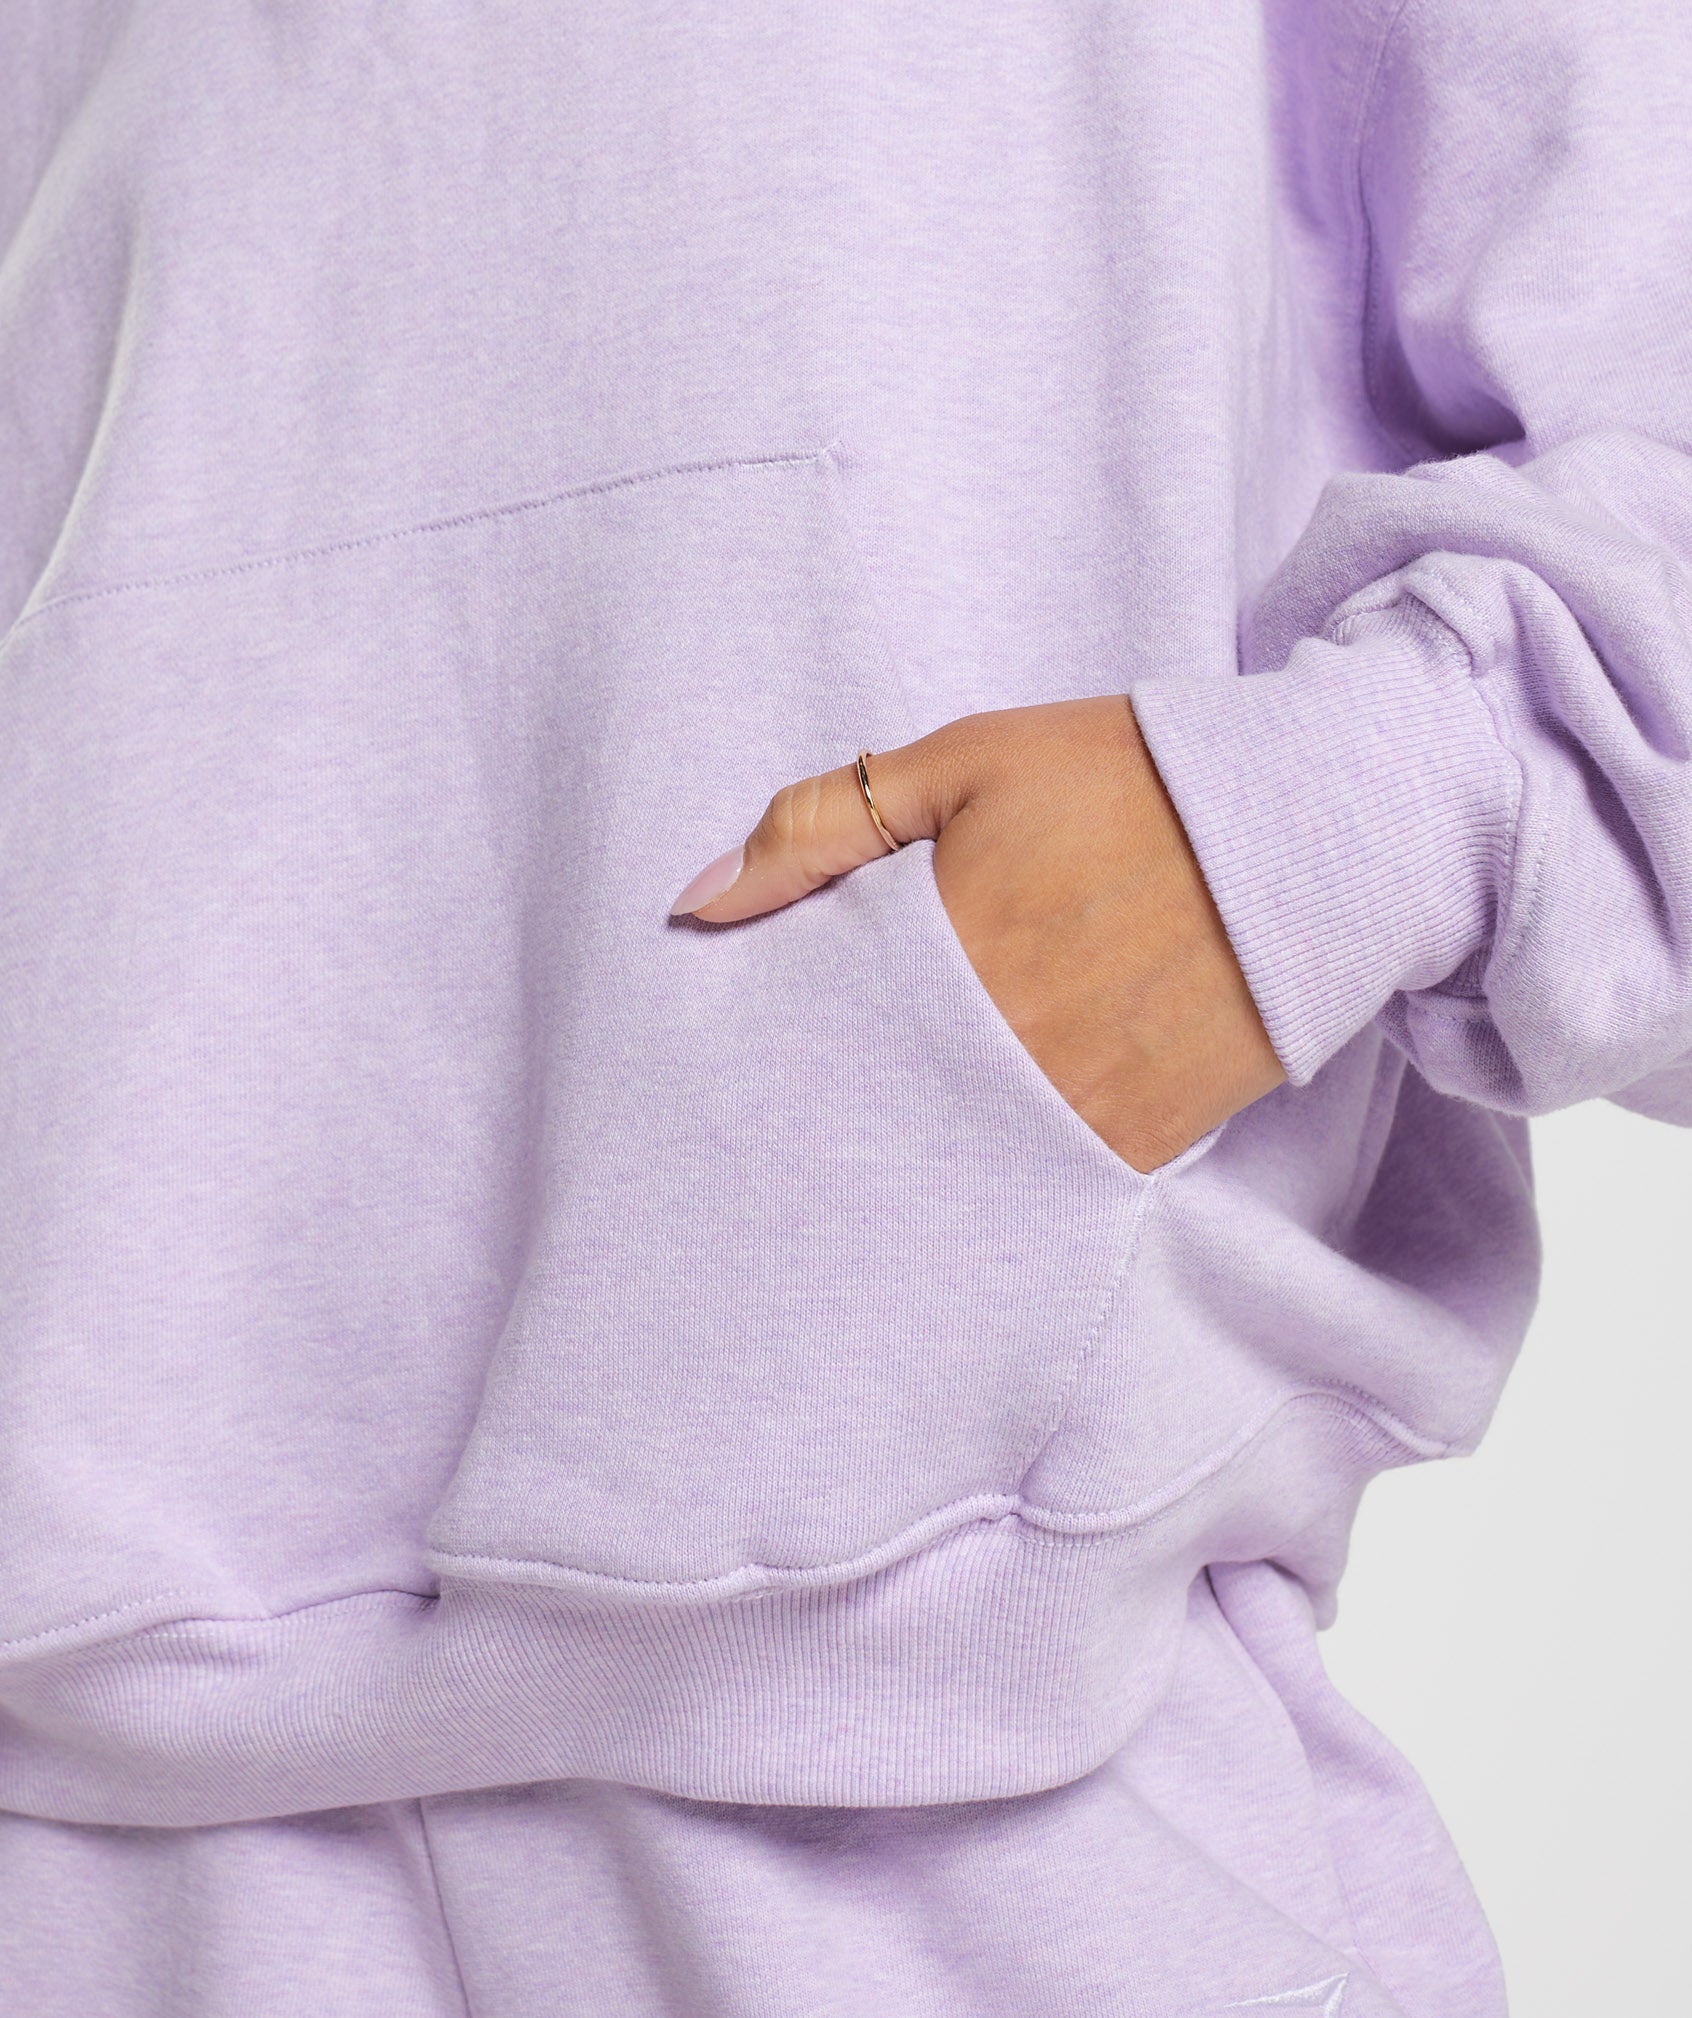 Rest Day Sweats 1/2 Zip Pullover in Aura Lilac Marl - view 7